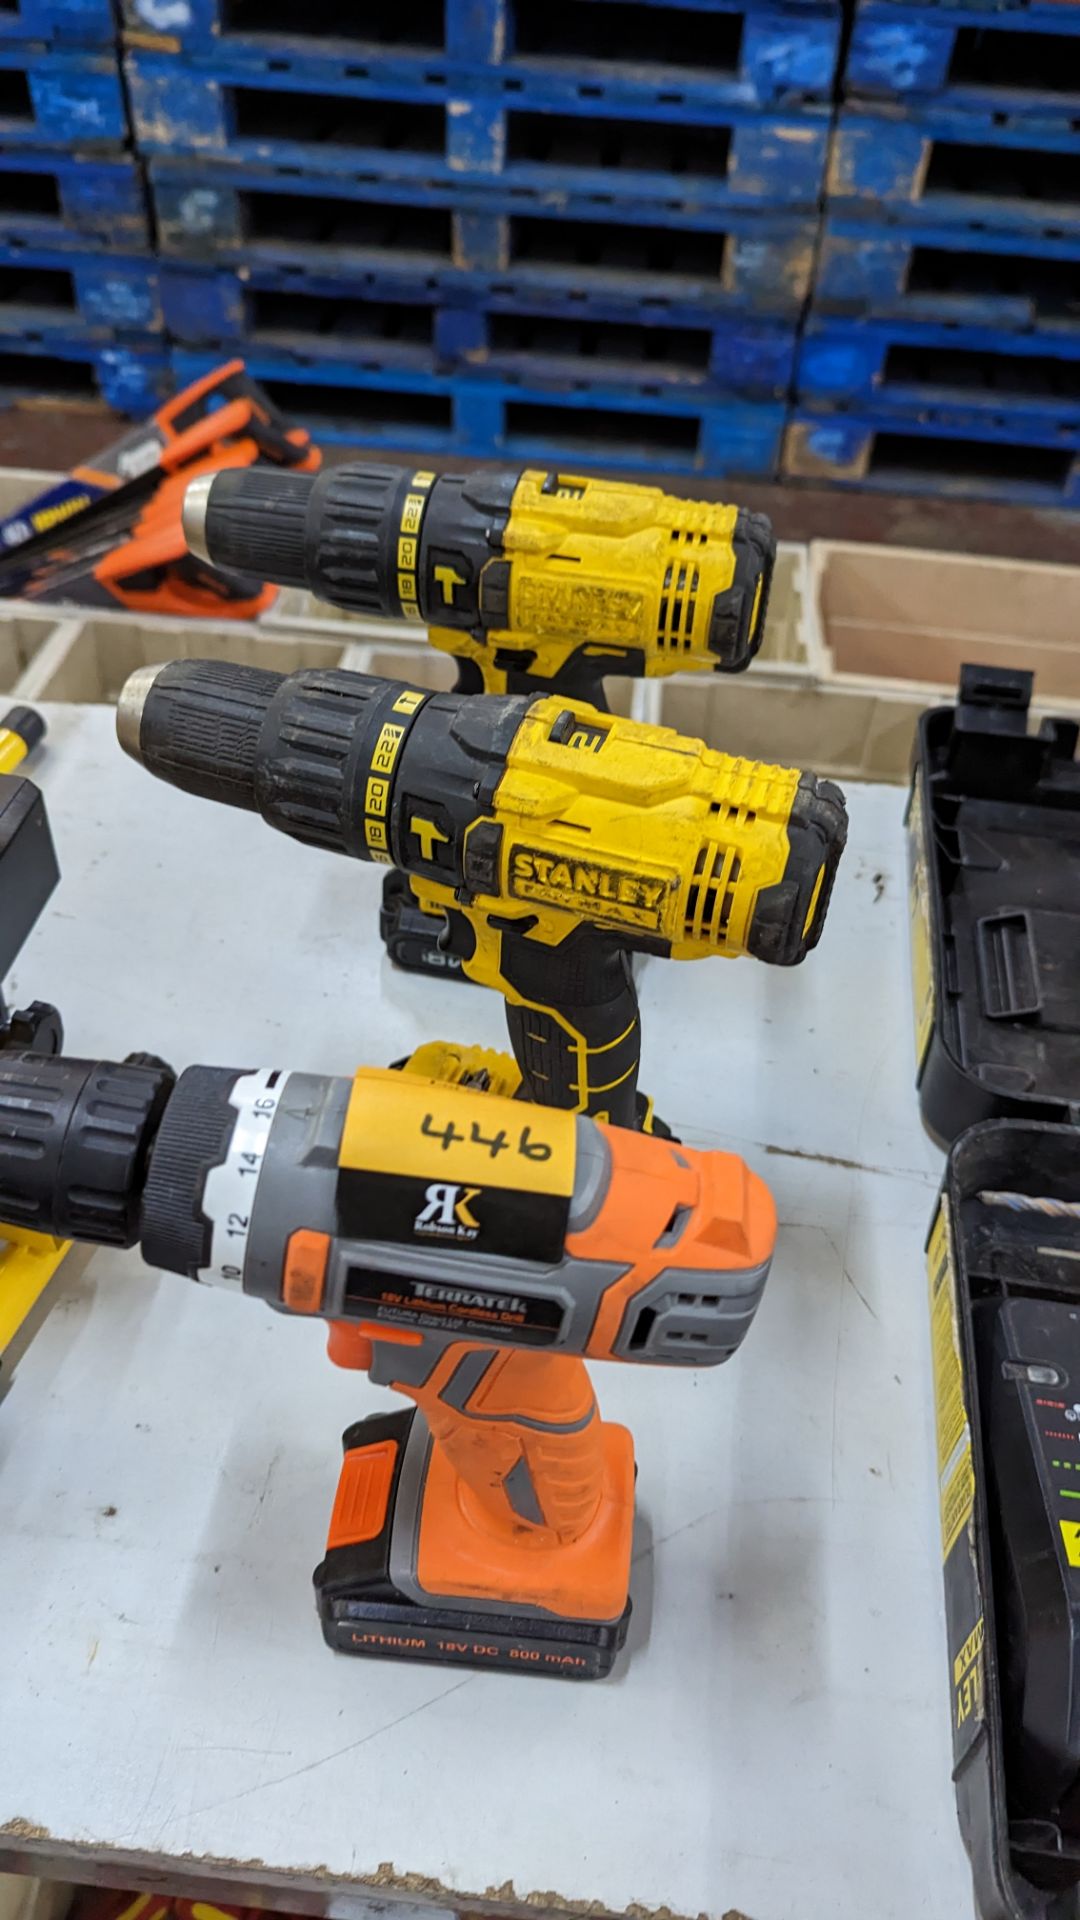 3 off 18 volt lithium cordless drills. Each drill includes an 18 volt lithium battery. This lot do - Image 7 of 7